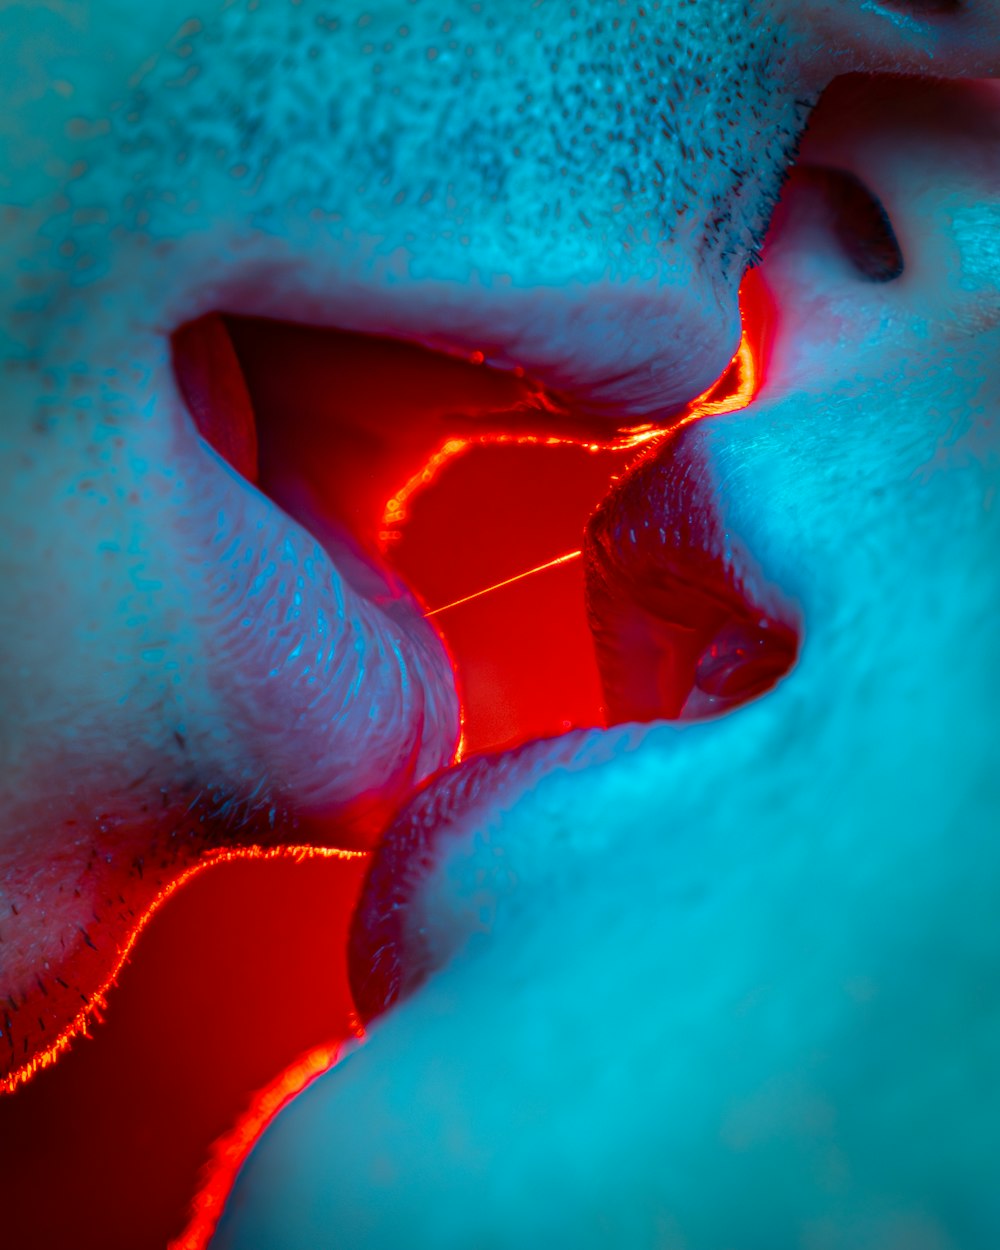 a close up of a person's neck with a red light